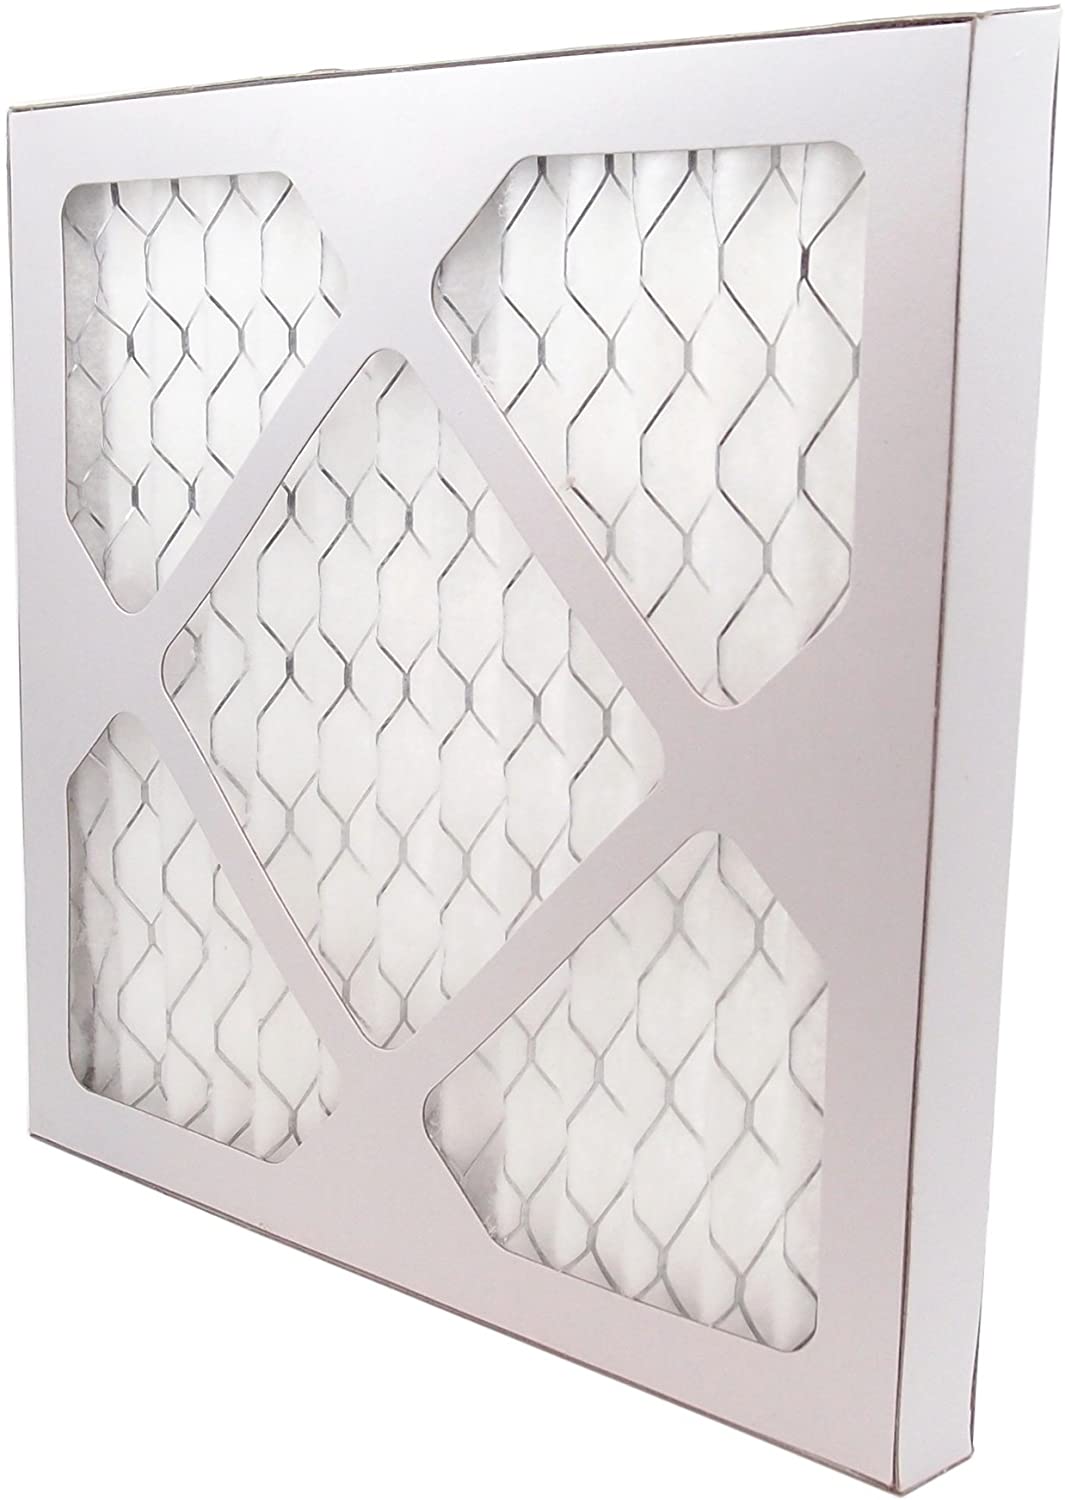 18&quot; x 22&quot; Pleated MERV 8 Filter for HVAC Return Filter Grille [Actual Dimensions: 17.75 X 21.75] 3-Pack